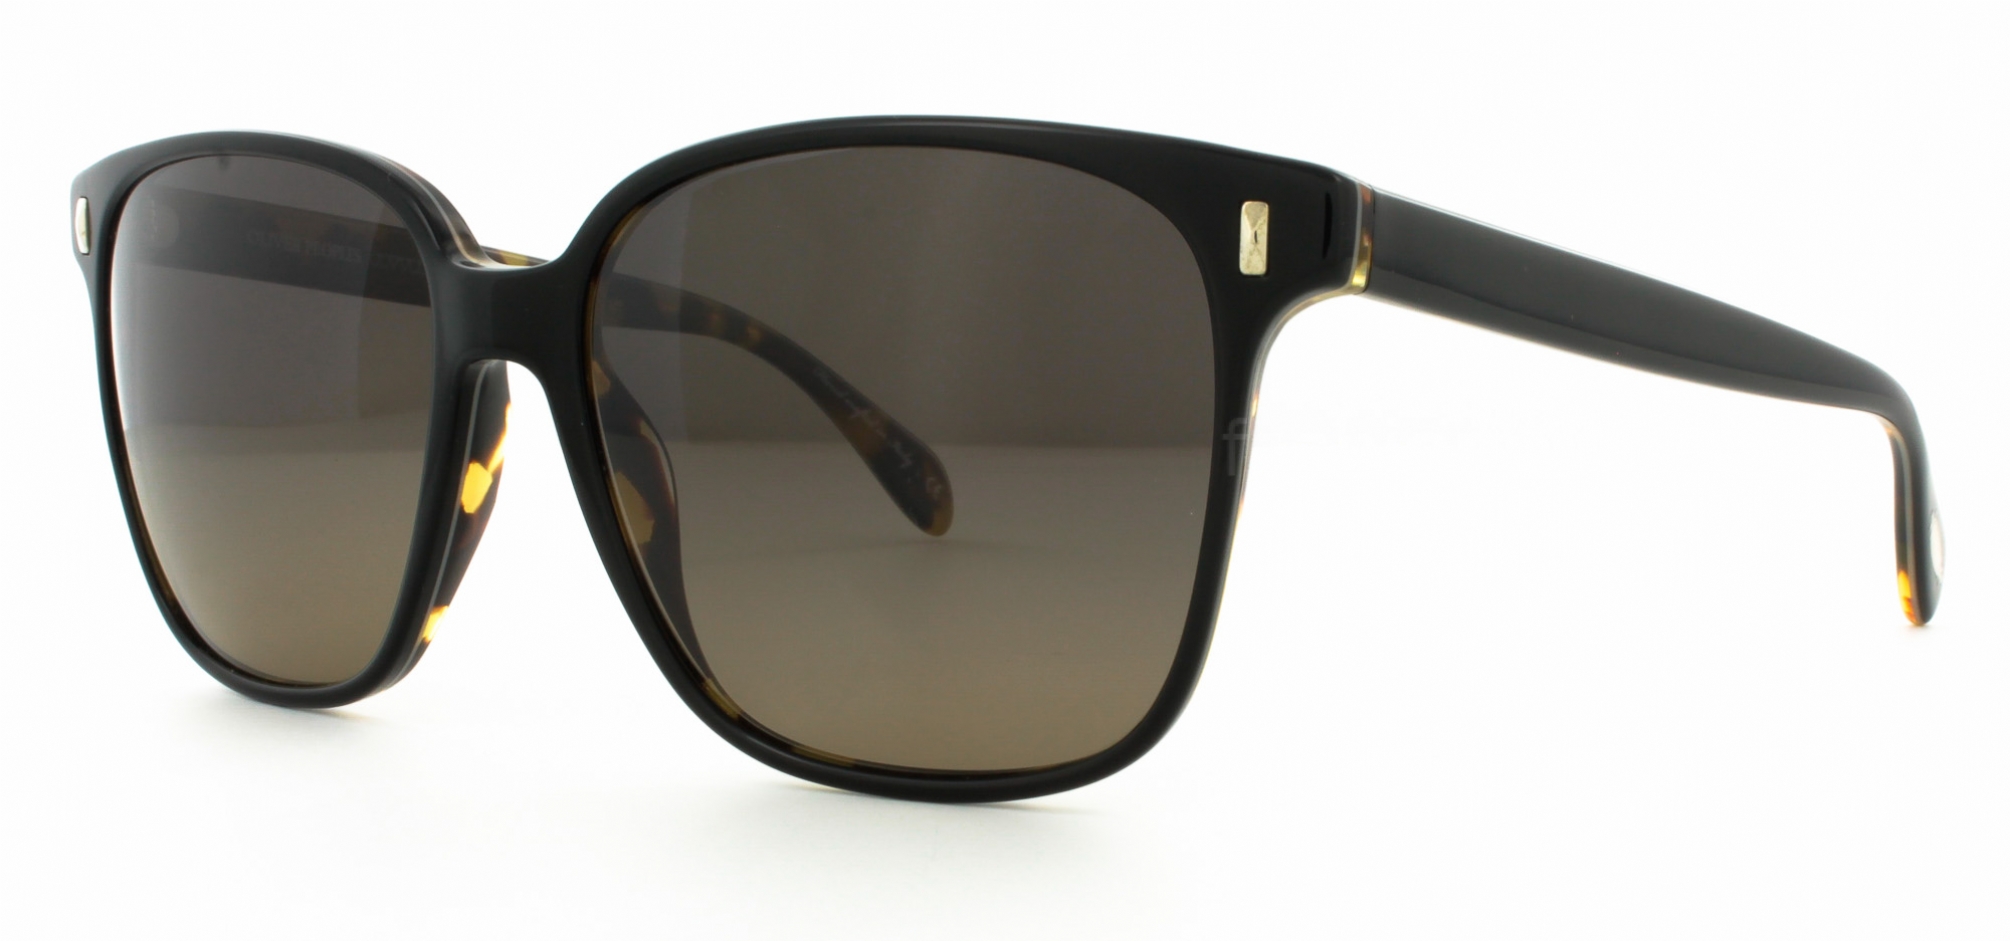 Buy Oliver Peoples Sunglasses directly from OpticsFast.com